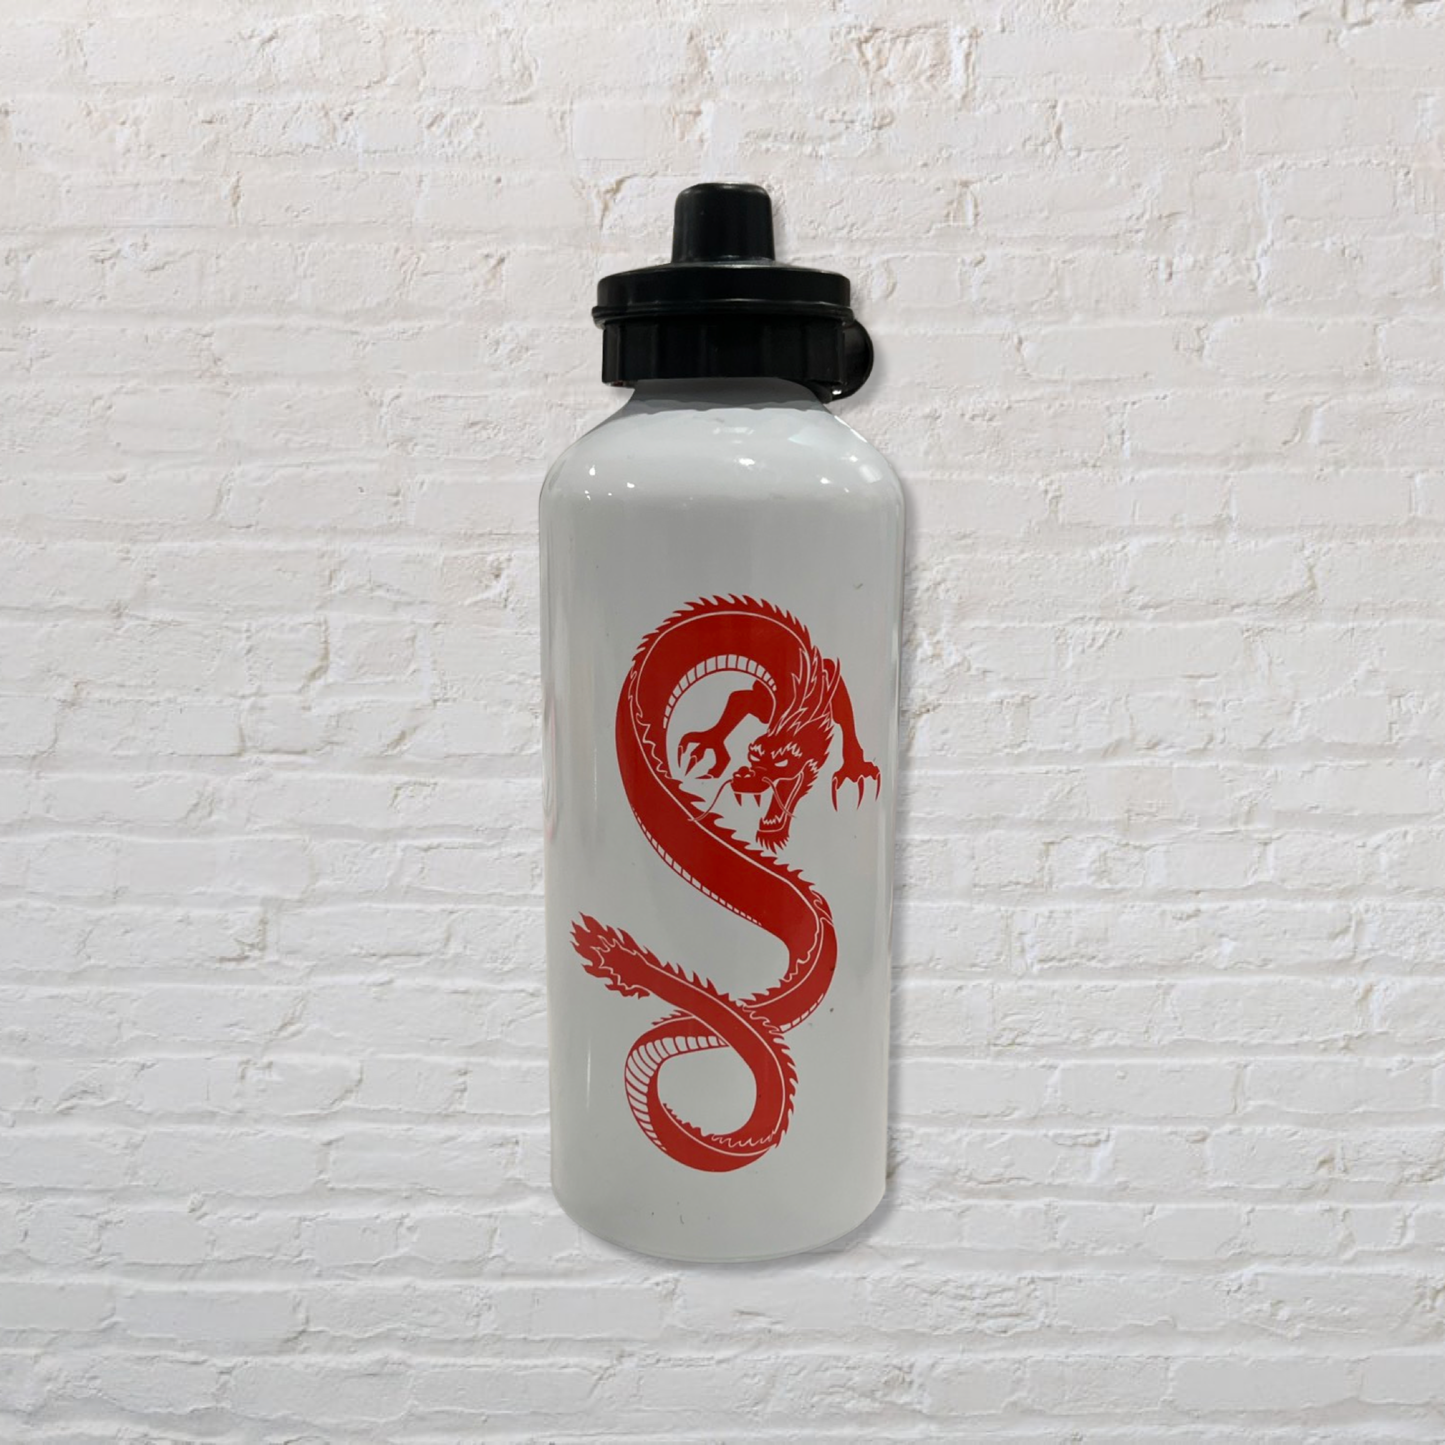 PMMA 20 oz Personalized Water Bottle